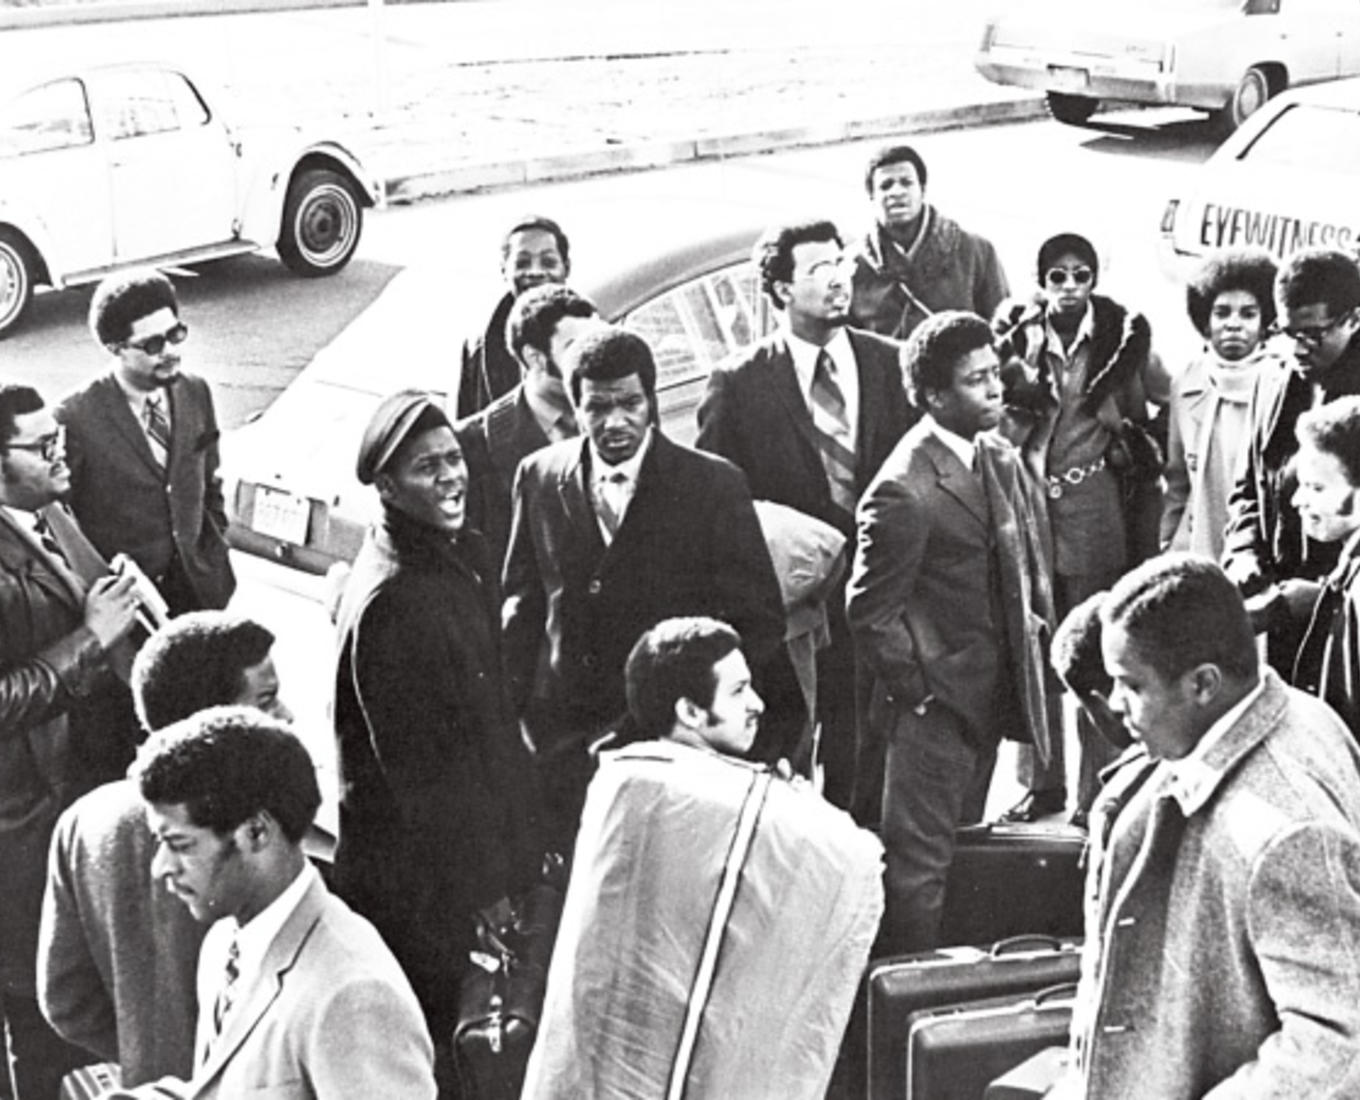 A group of mostly men gathered outside on a road by parked cars